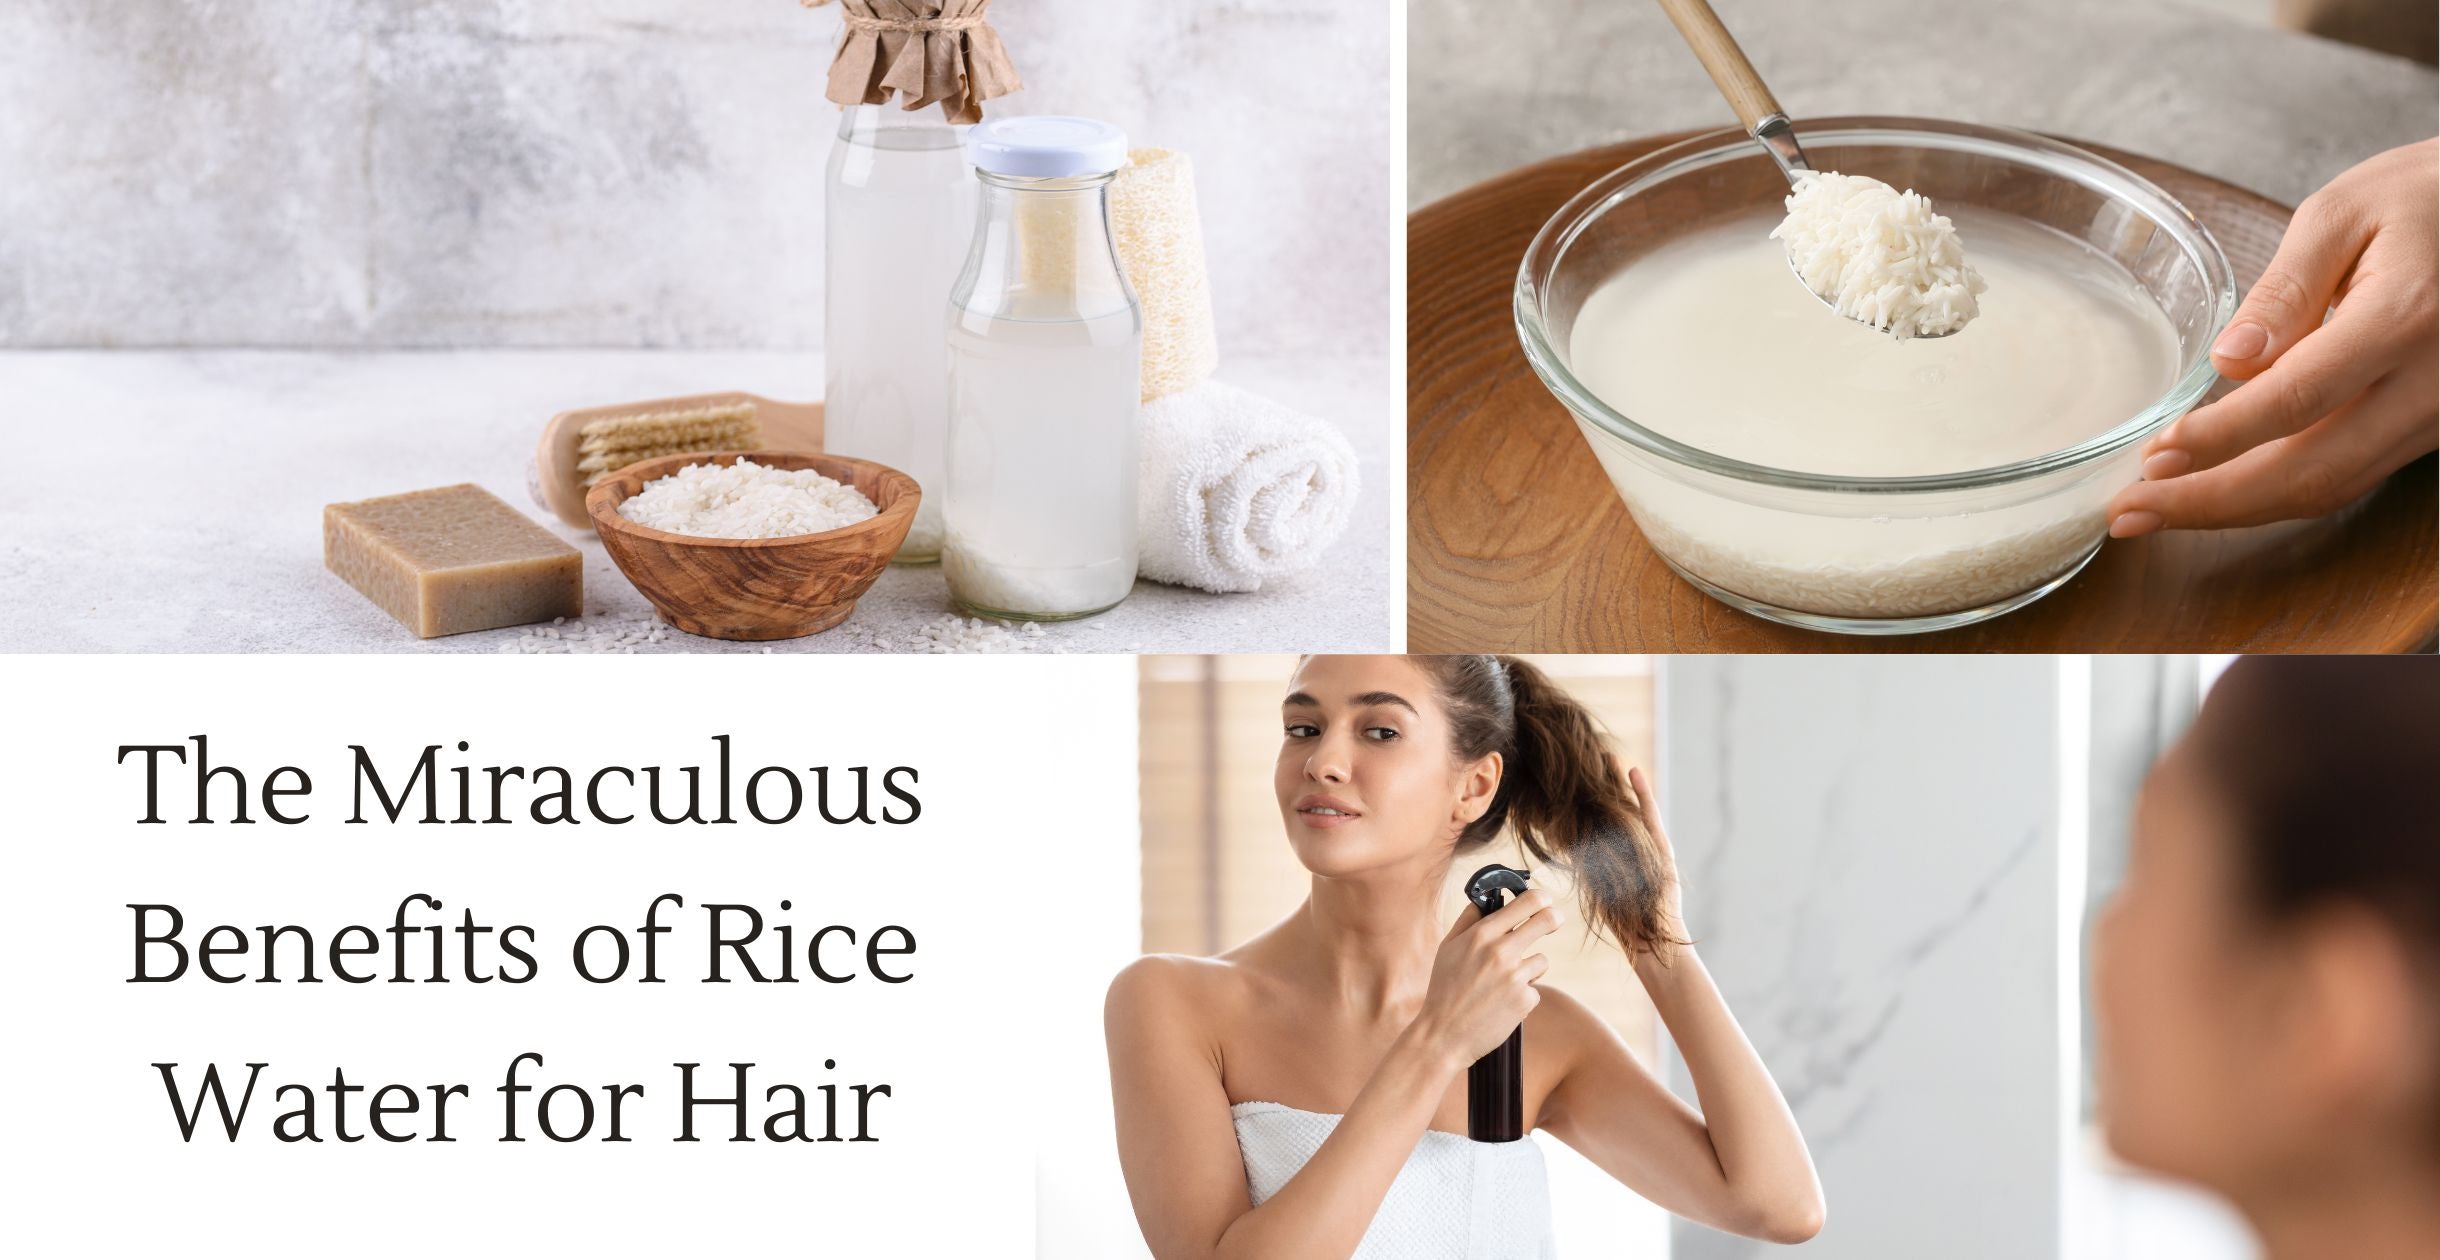 The Miraculous Benefits of Rice Water for Hair